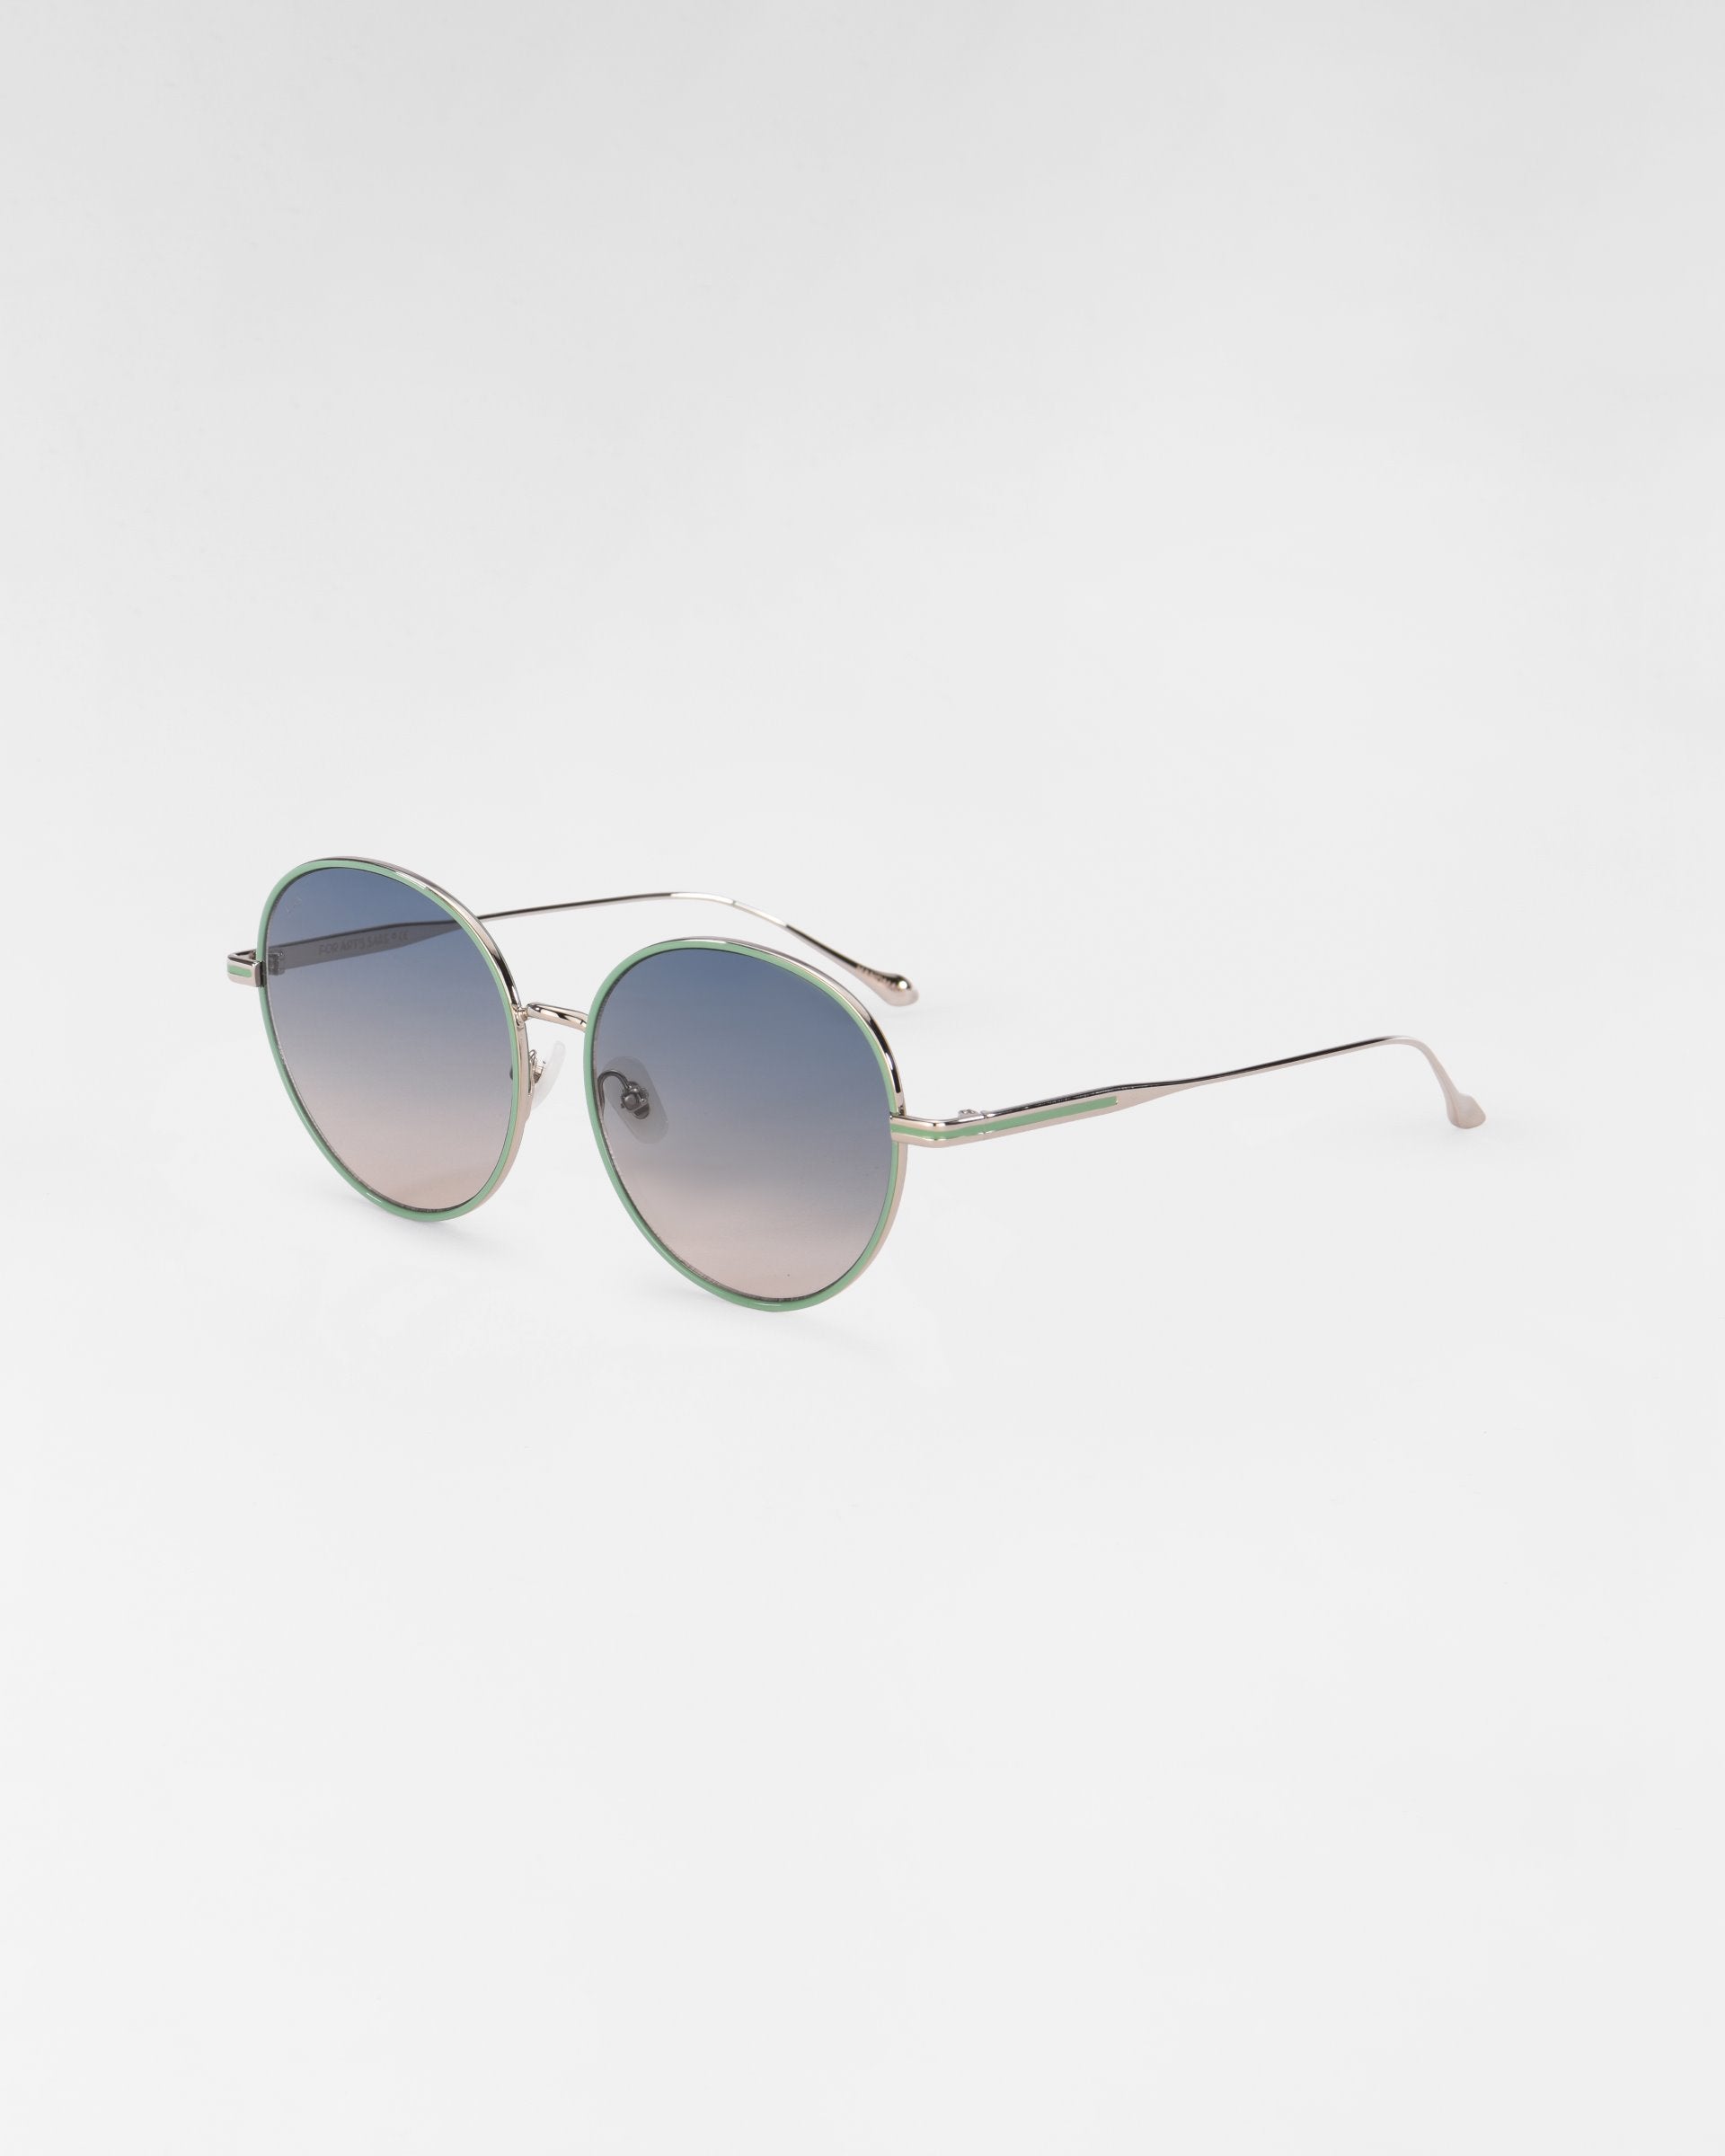 A pair of Lemon sunglasses by For Art&#39;s Sake® with thin metal frames and gradient lenses, transitioning from dark at the top to lighter at the bottom, featuring jadestone nose pads, resting on a plain white background.